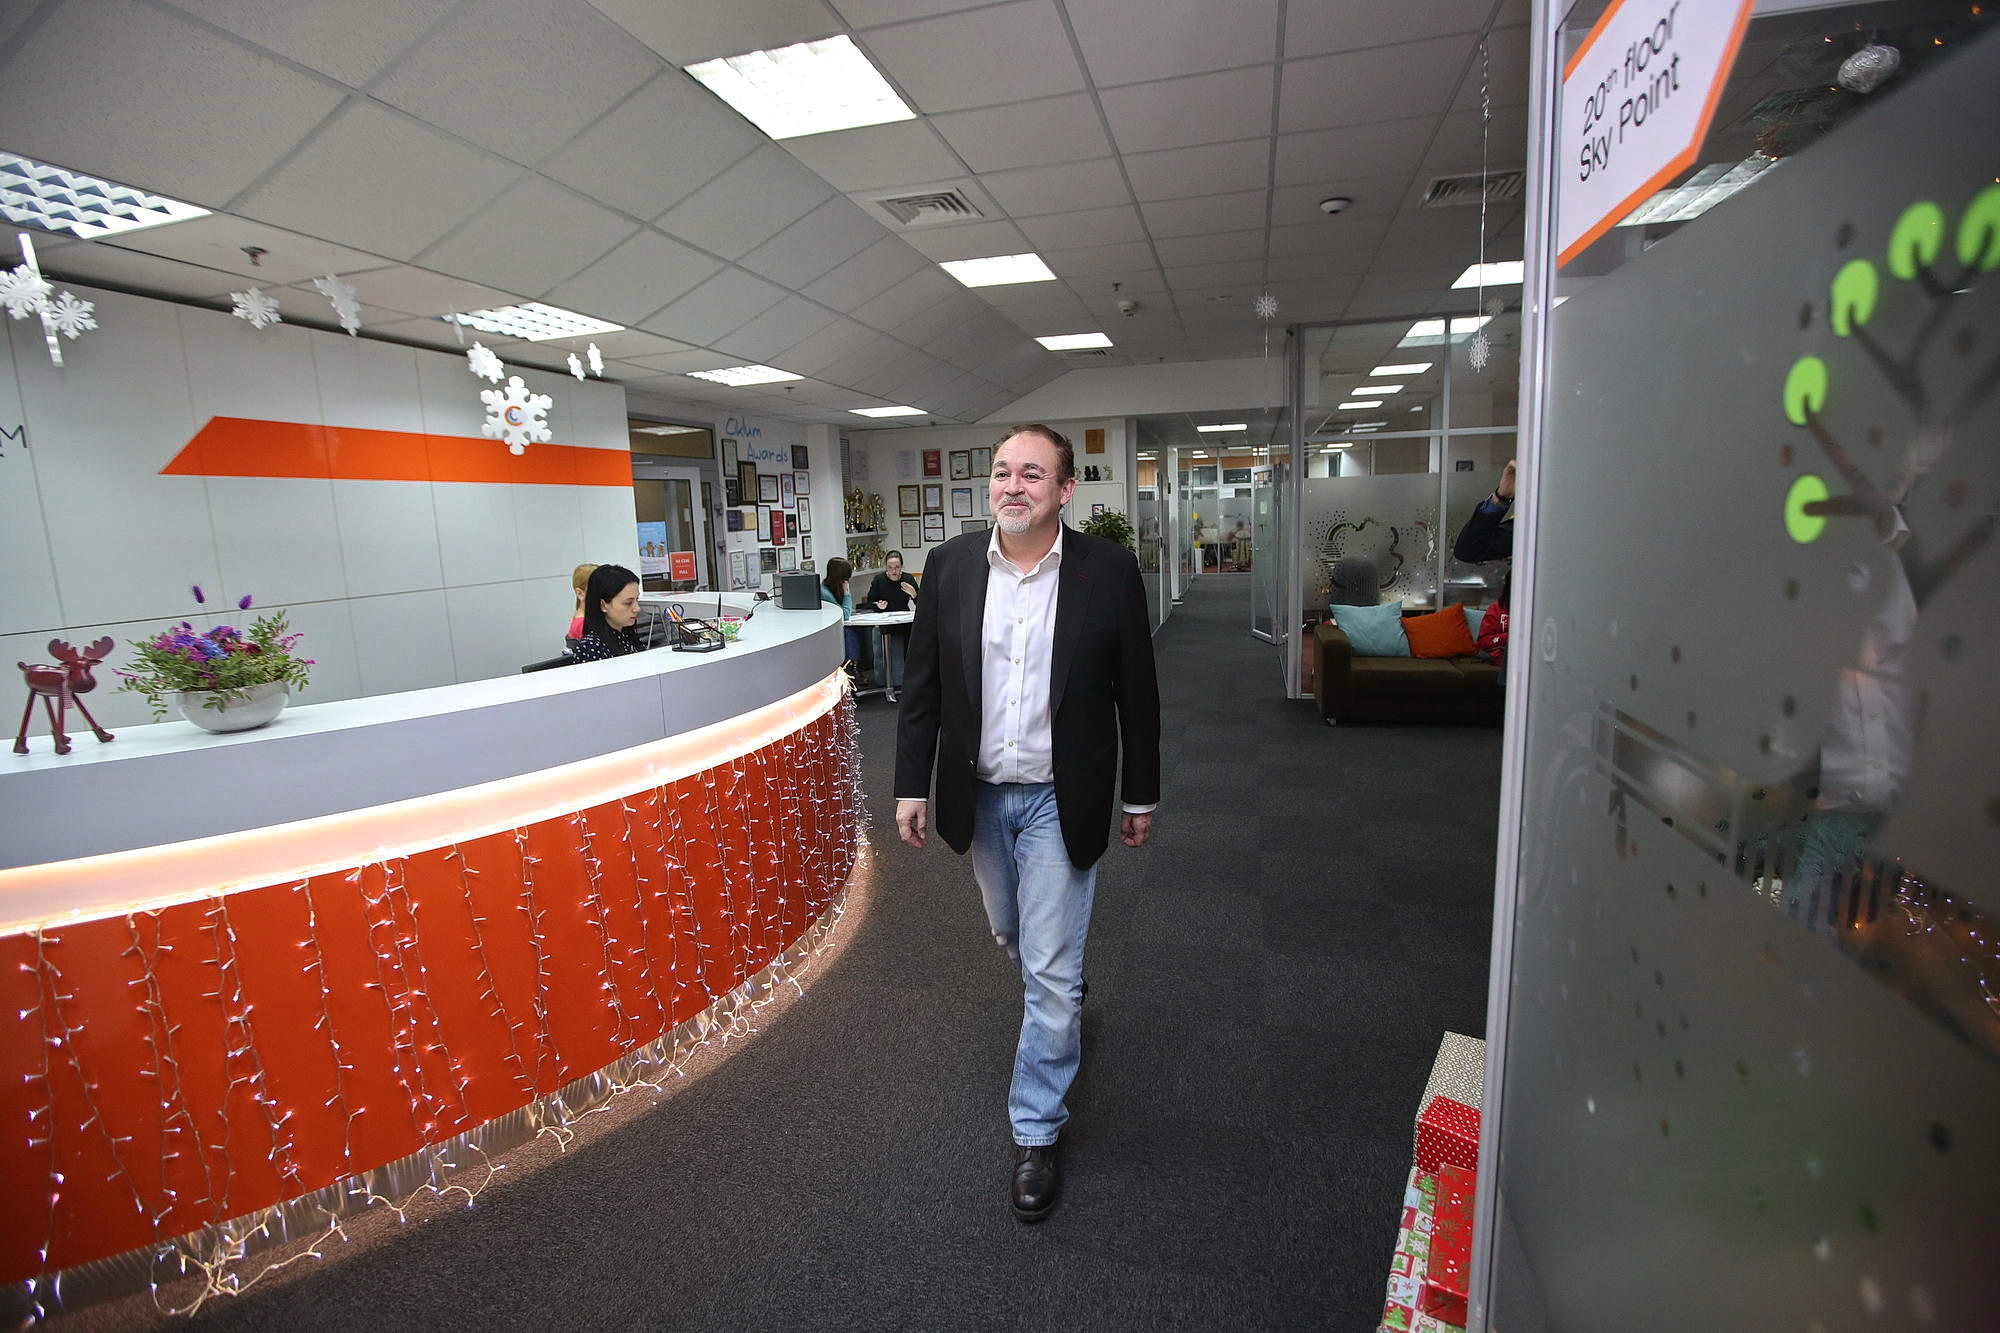 Ciklum founder Torben Majgaard walks through the main hall of the headquarter of his tech firm in Kyiv. Ciklum has six offices and 2,500 employees in Ukraine alone and 13 offices abroad, including in the United States and the United Kingdom.